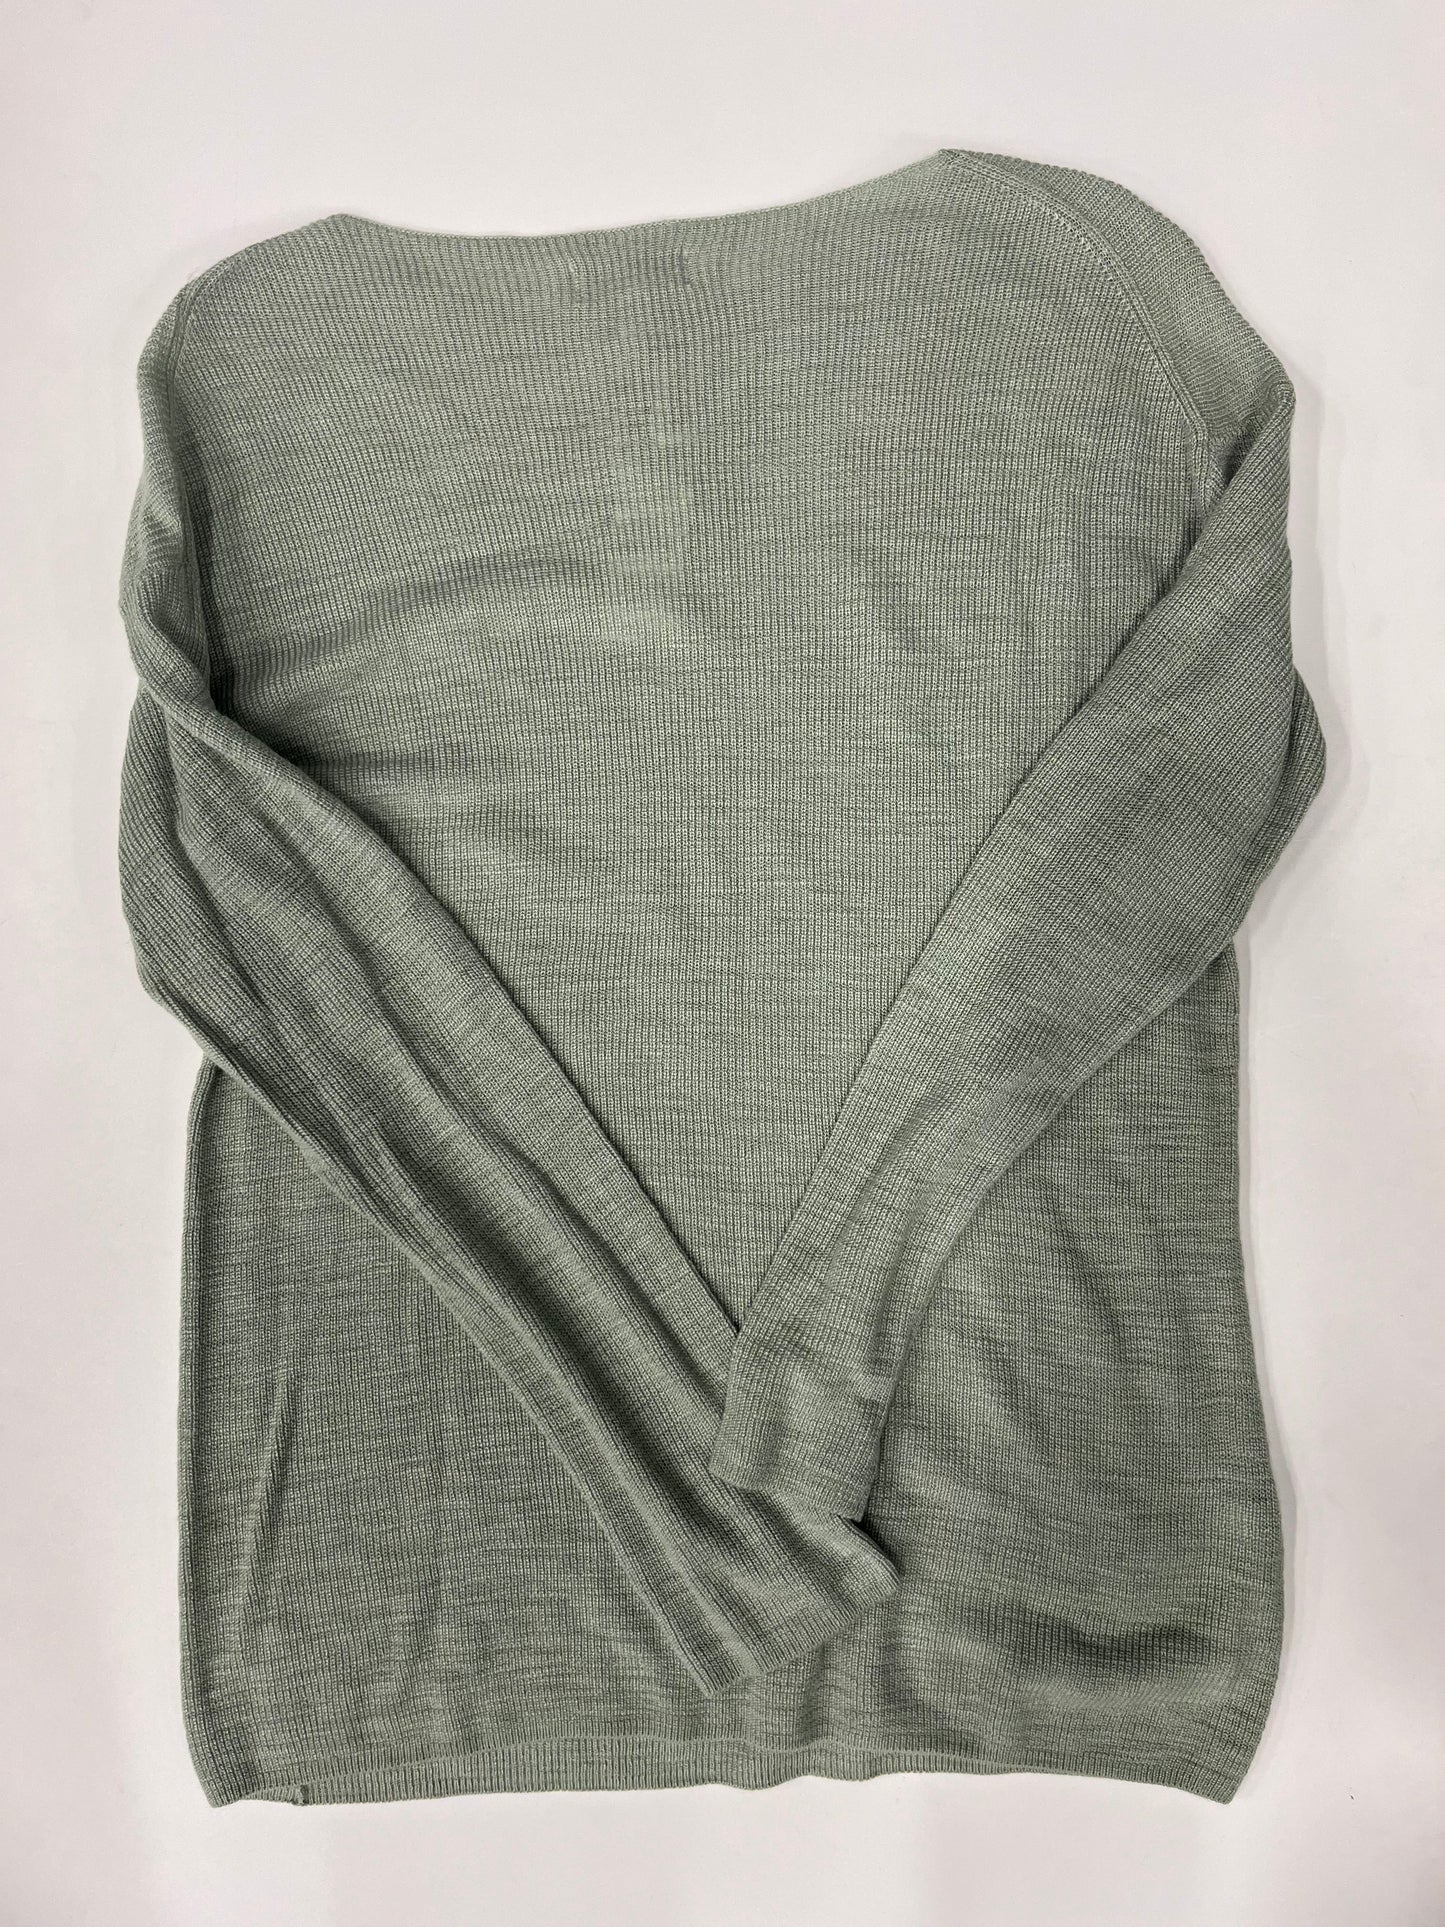 Sweater By Lou And Grey NWT  Size: Xs